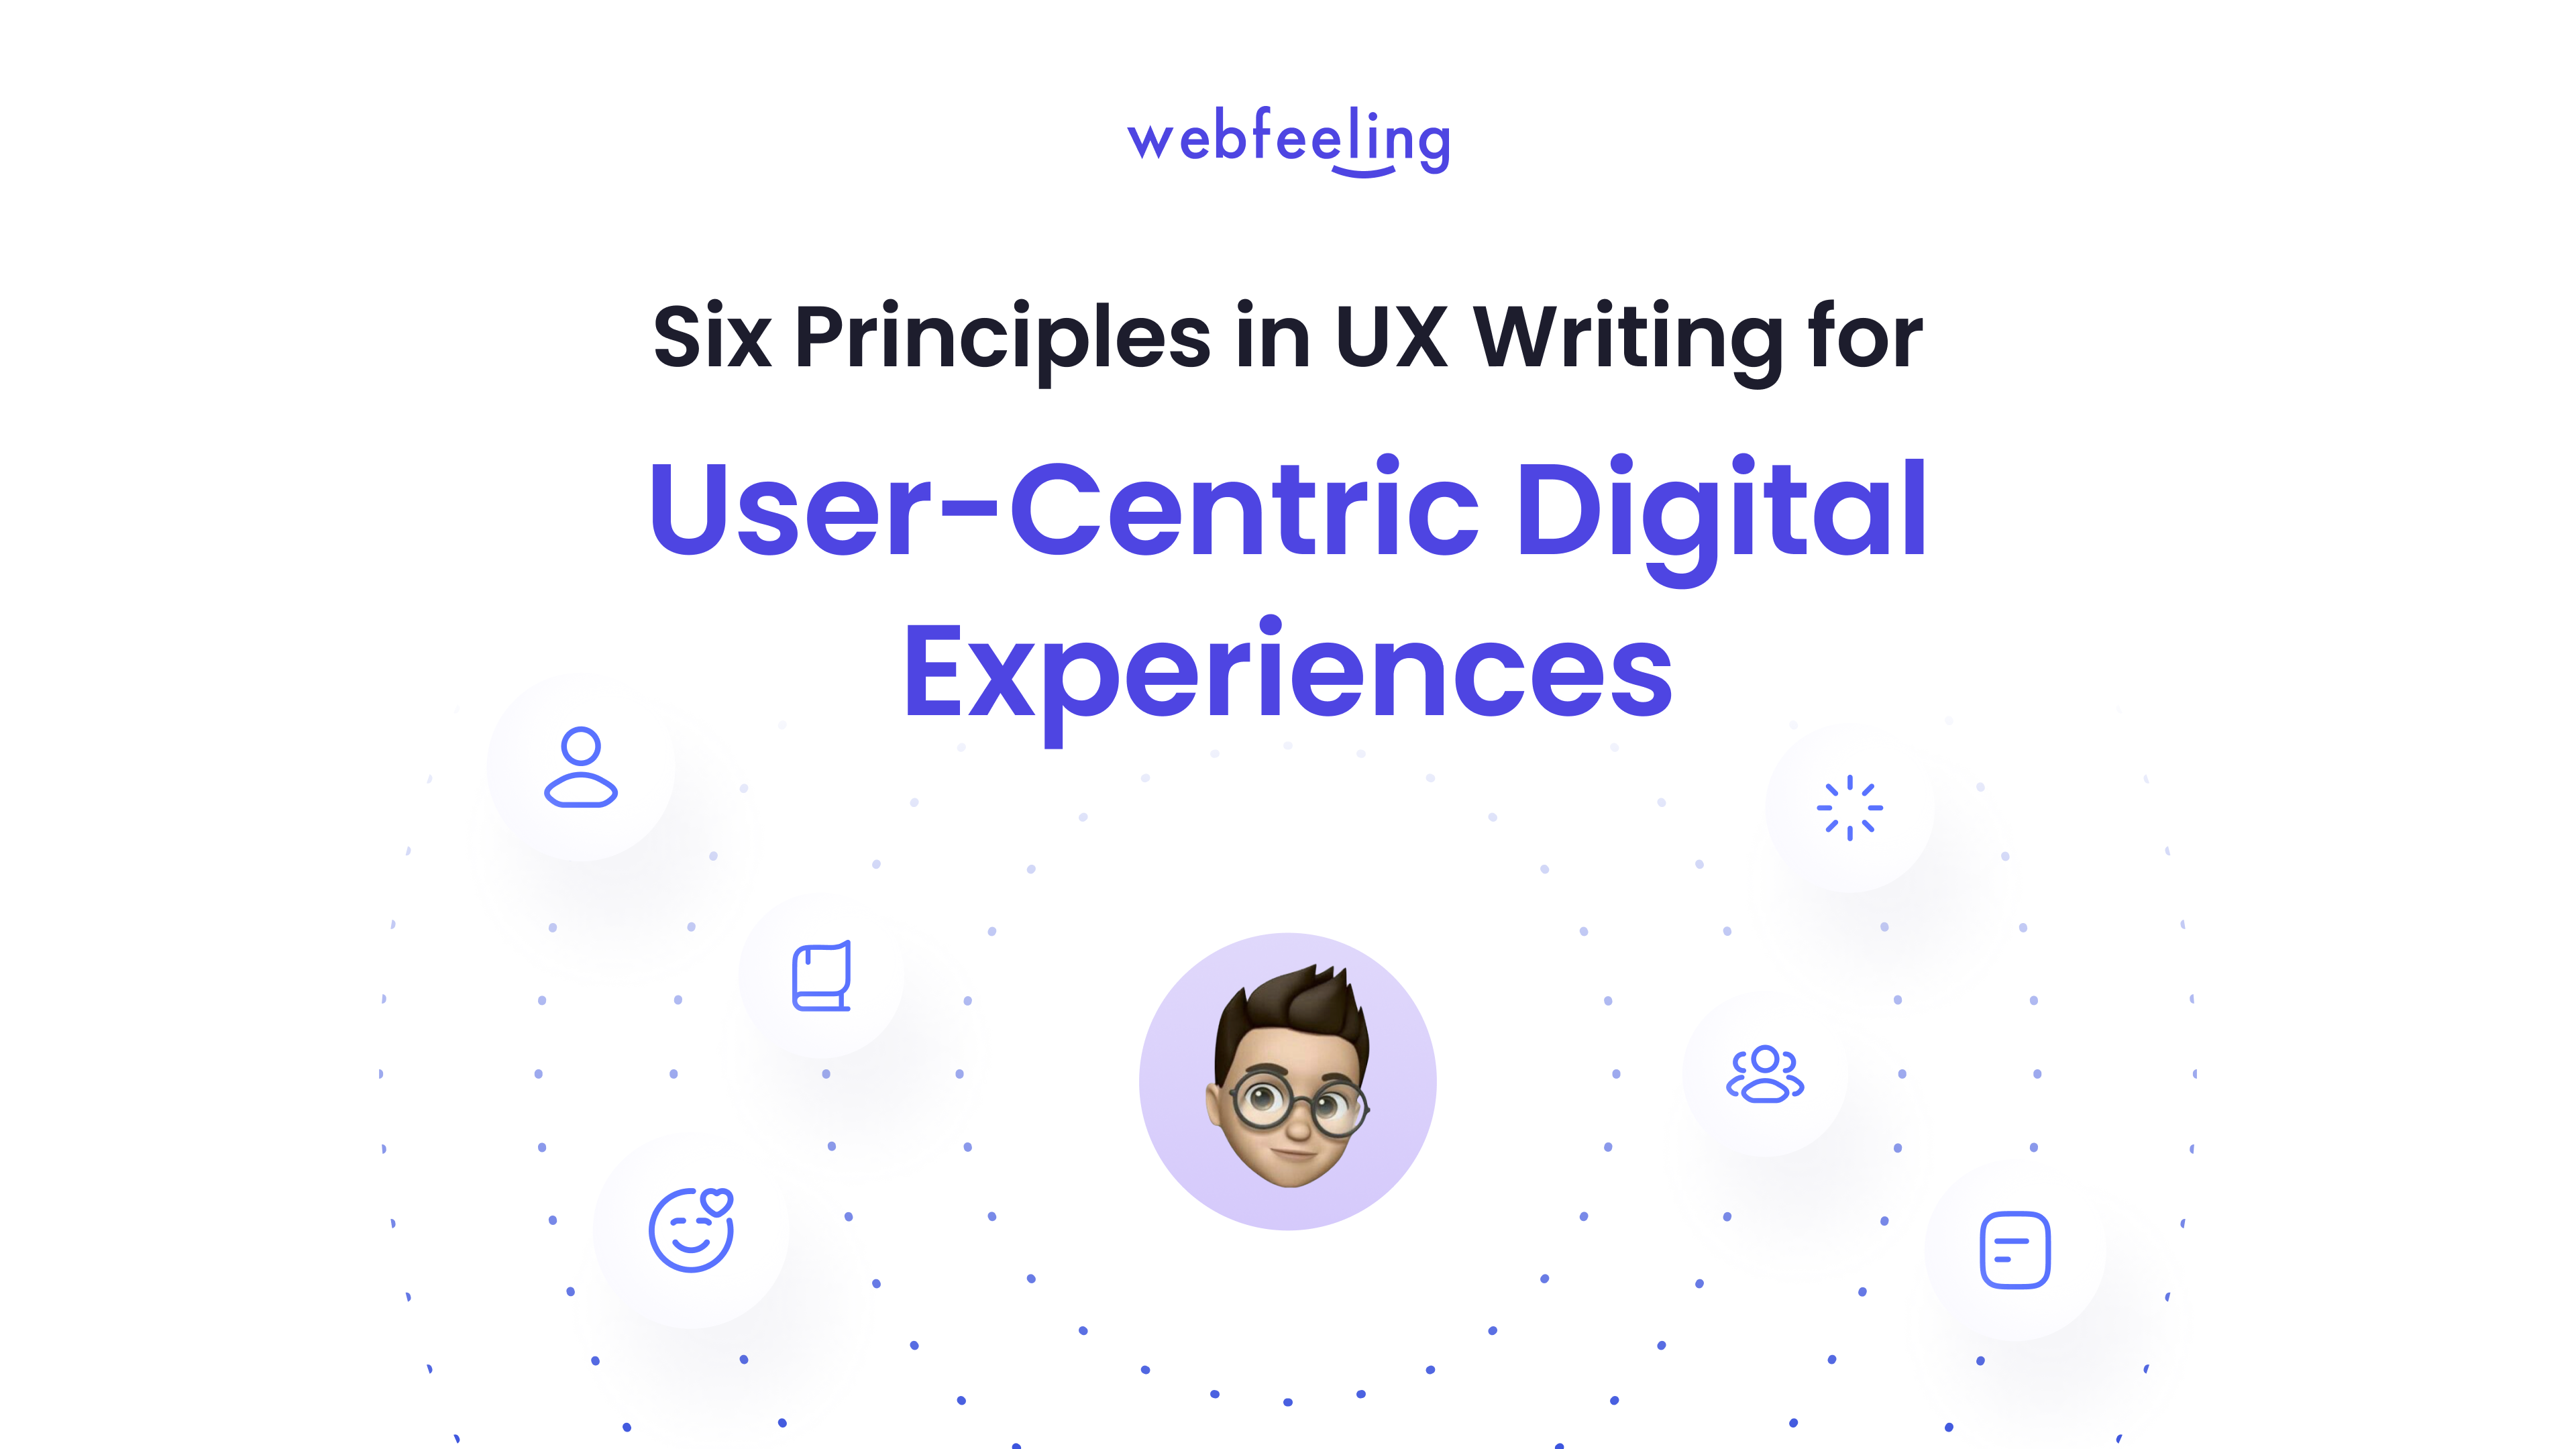 Six Principles in UX Writing for User-Centric Digital Experiences